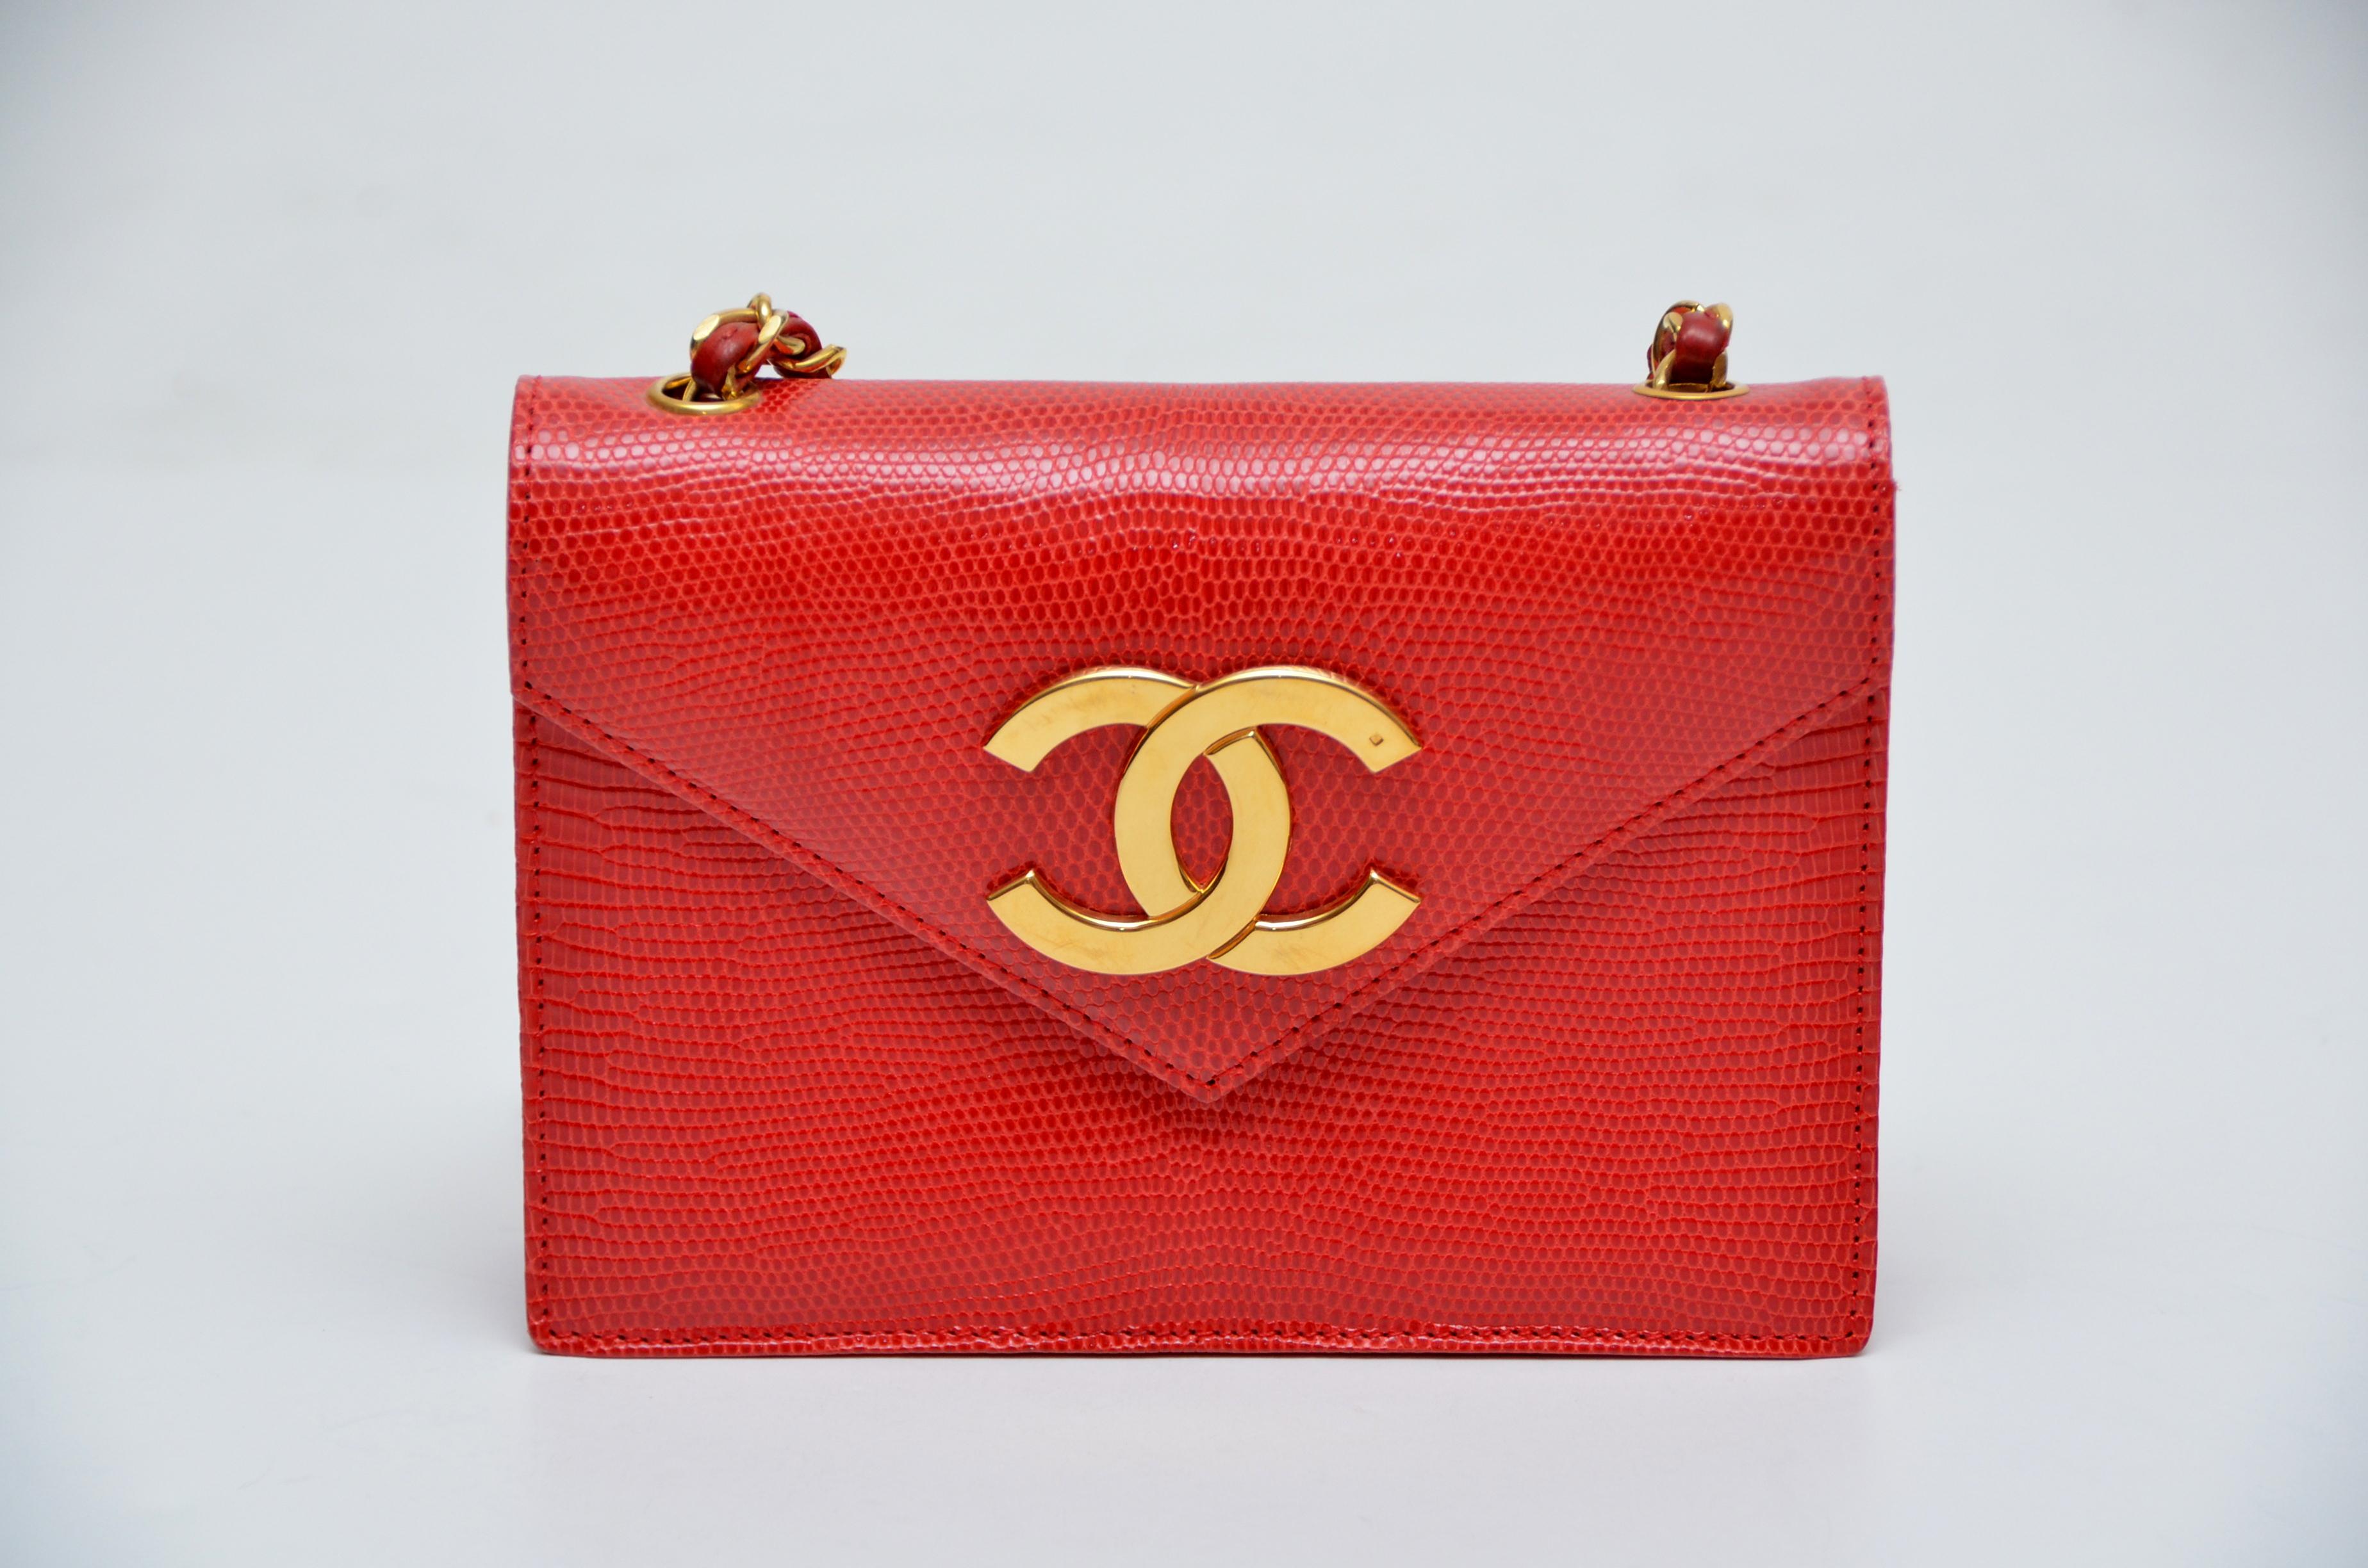 Very rare collectors Chanel red lizard handbag.
Excellent condition with some wear on the shoulder strap and some scratching on the large front CC gold-plated buckle.
Color in person is beautiful vermilion red .Color might look slightly different in